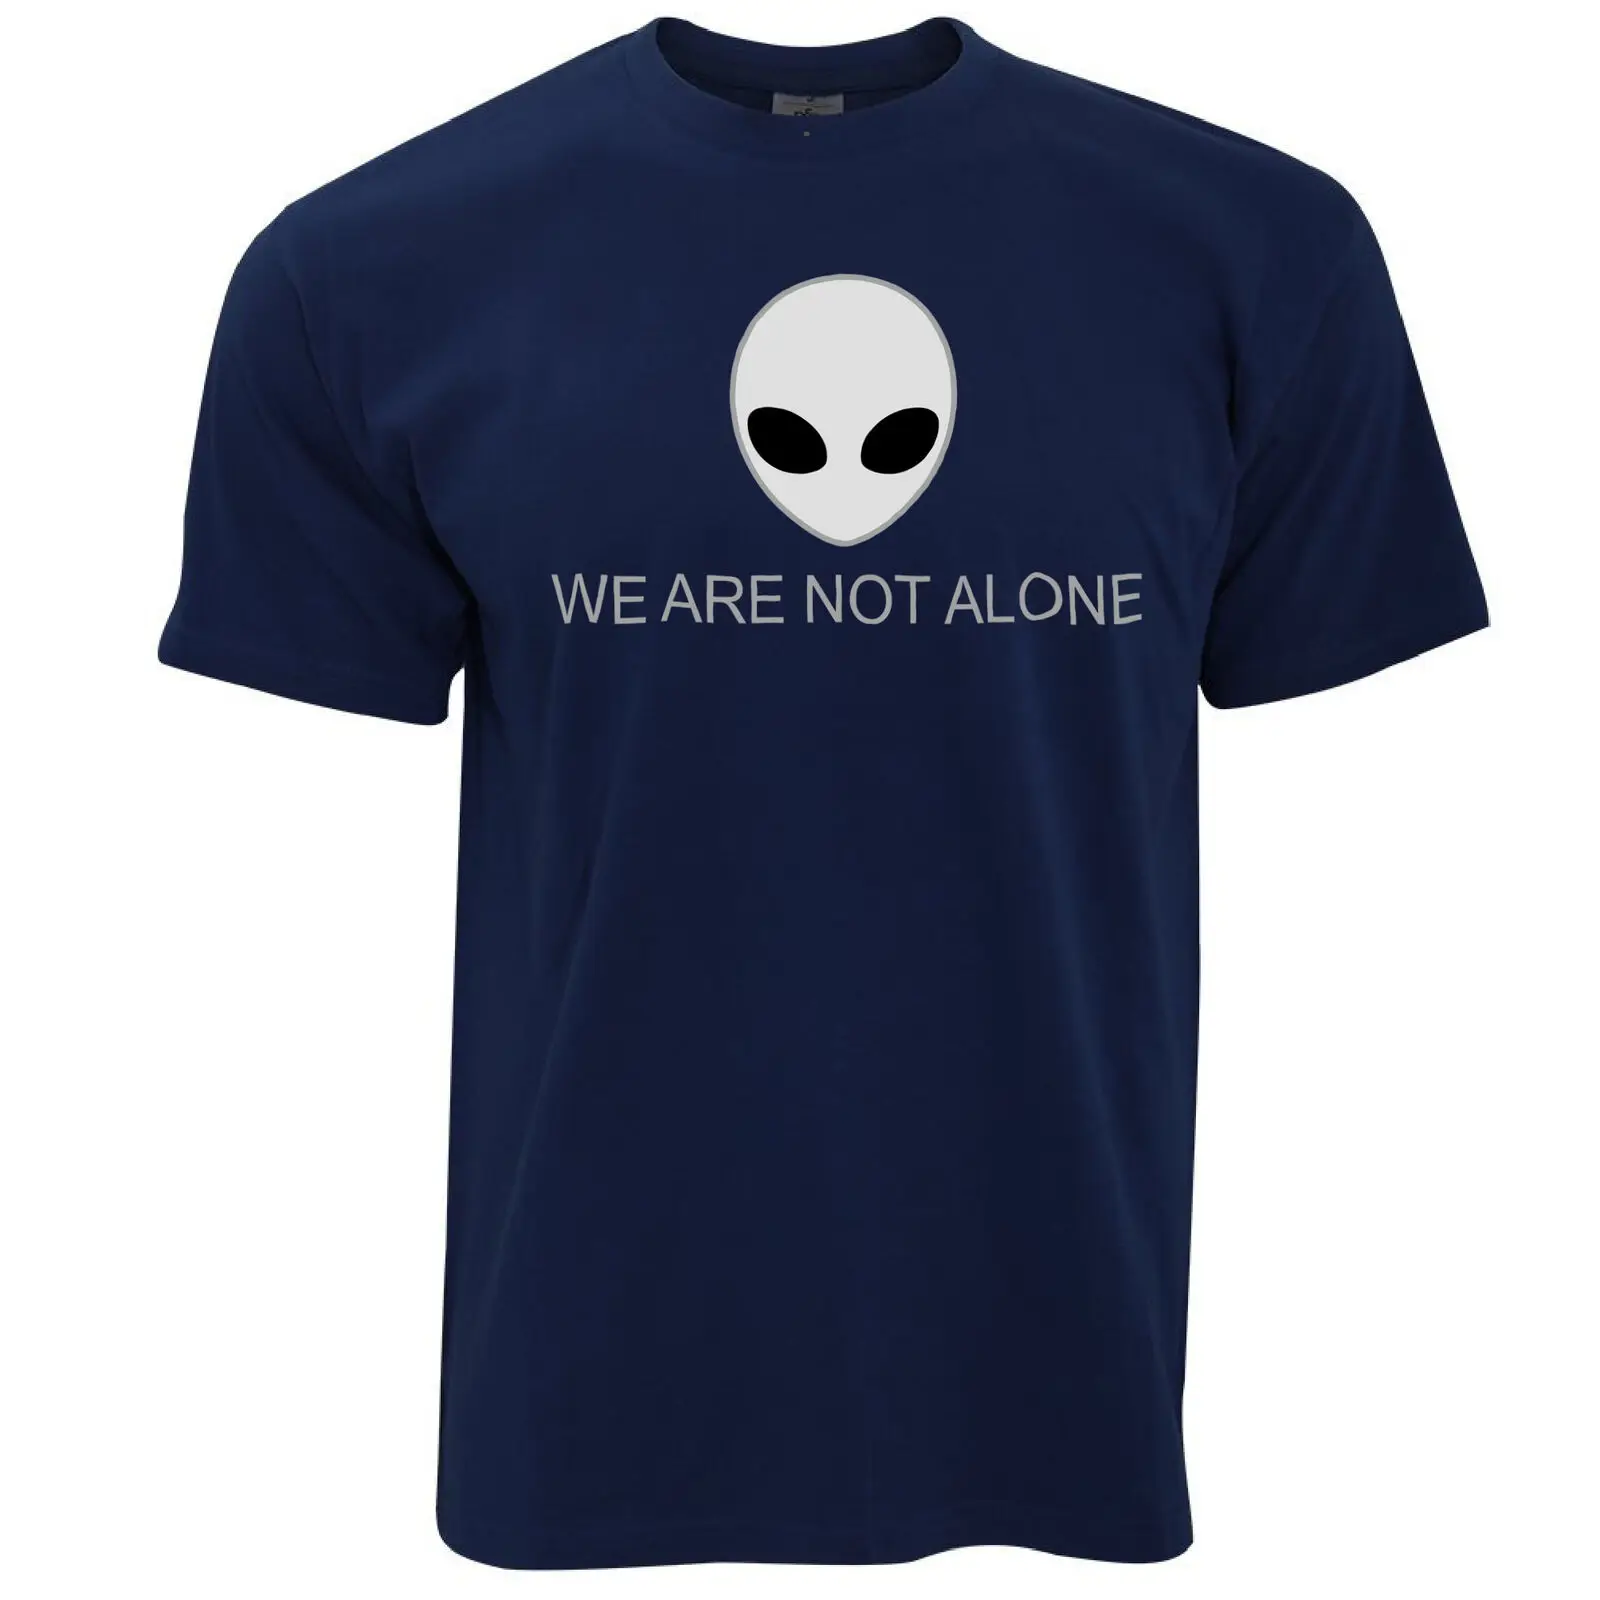 

Nerdy Alien Head T Shirt We Are Not Alone Slogan Geeky Iconic Sci Fi Ufo 2019 Fashion Solid Color Men T Shirt Sleeveless T Shirt